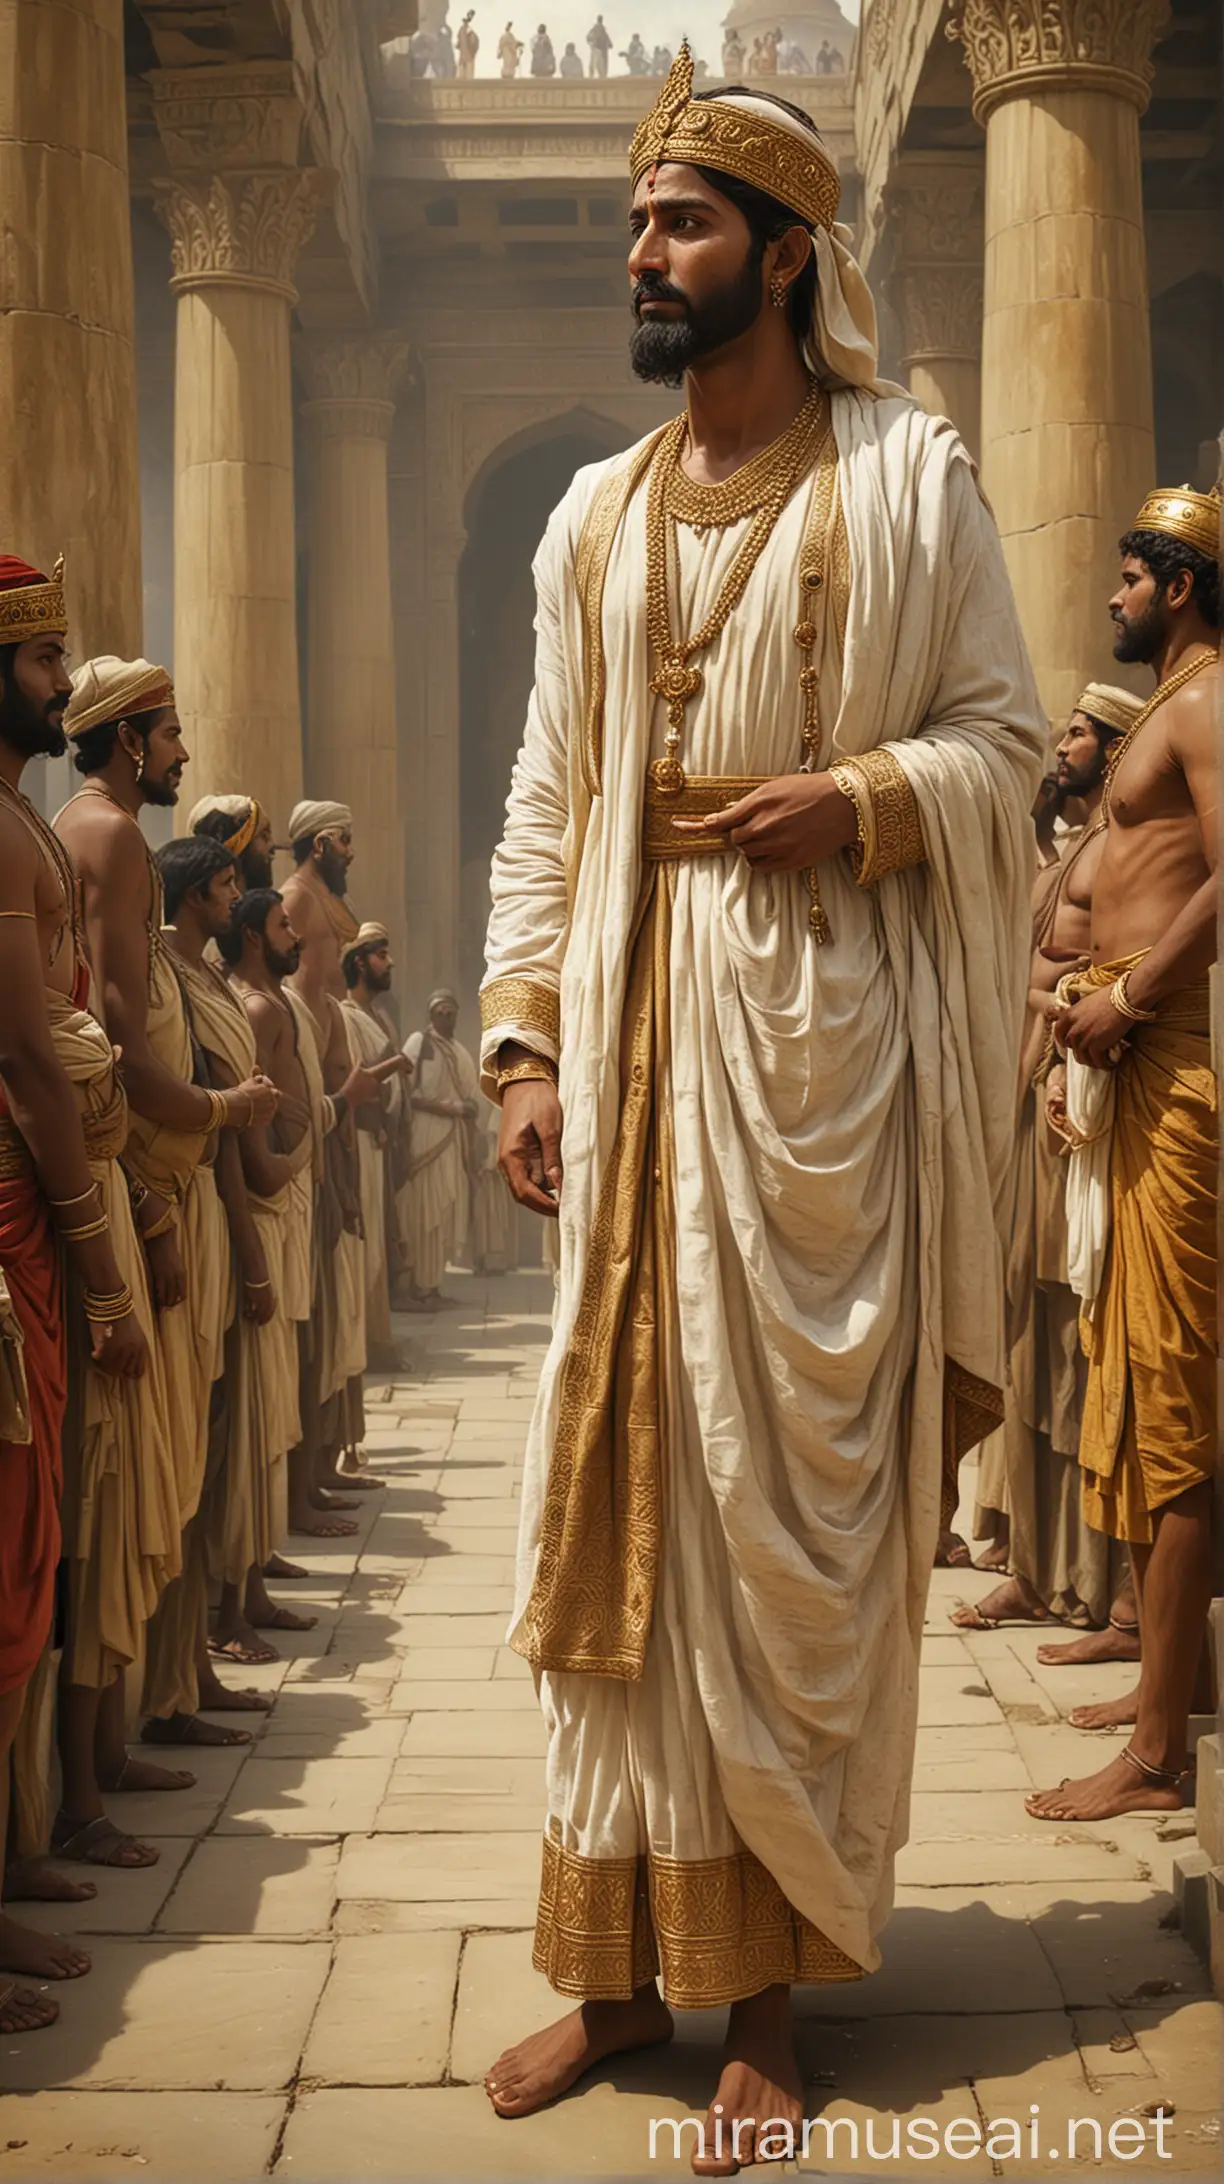 Create an image depicting Bengali, a dignified figure, standing amidst the grandeur of King Jehoshaphat's court in the 19th century BC.In ancient world 